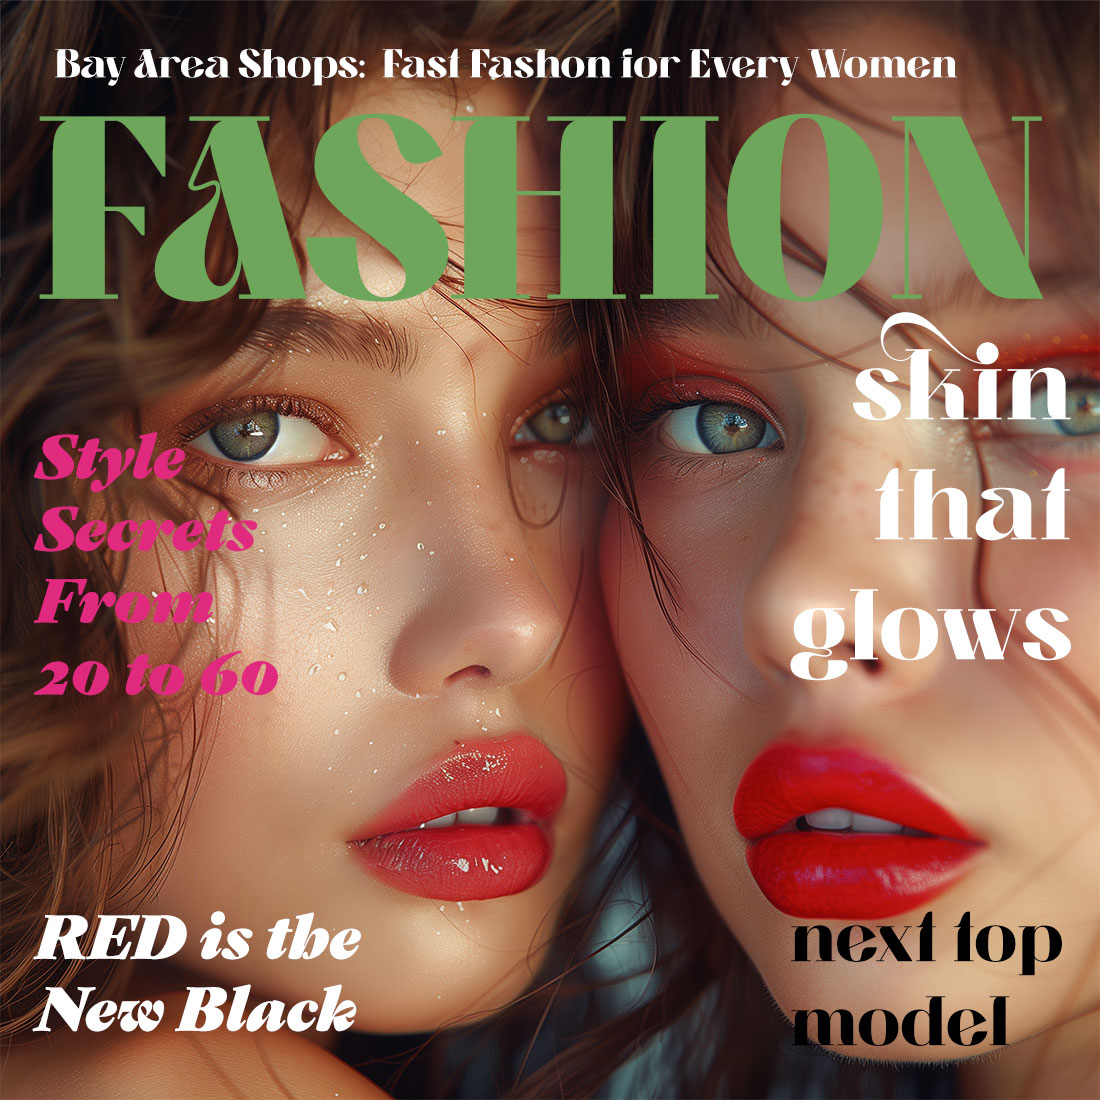 Models with pristine skin and red lipstick magazine cover